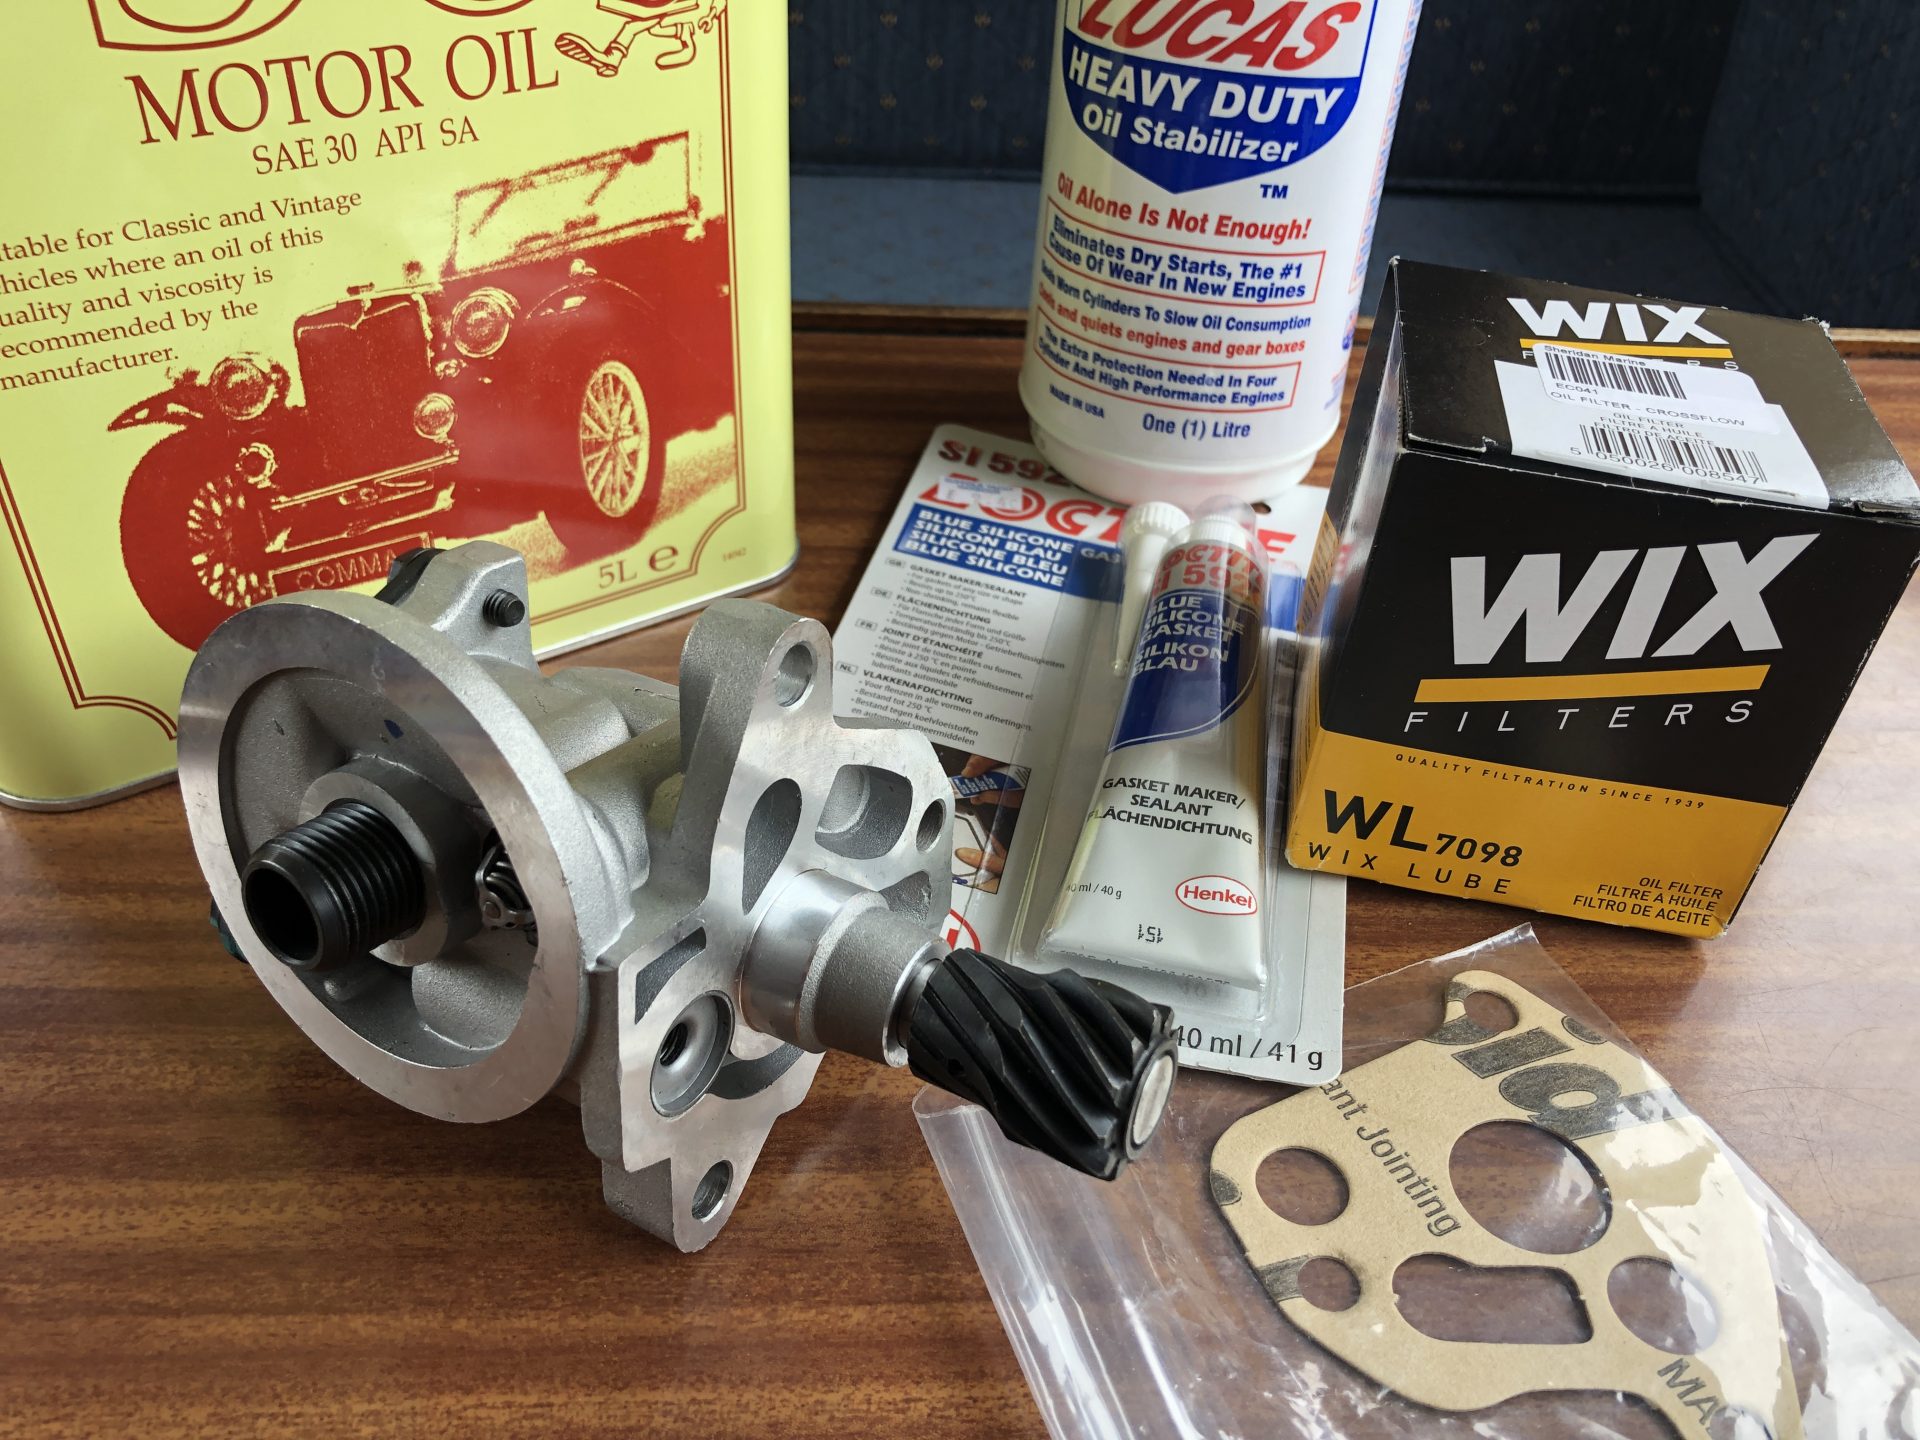 SAE30 Singlegrade motor oil, Lucas heavy duty oil stabiliser, new spin-on oil pump and filter assembly, oil pump gasket, spin-on oil filter and gasket sealant just to be sure.